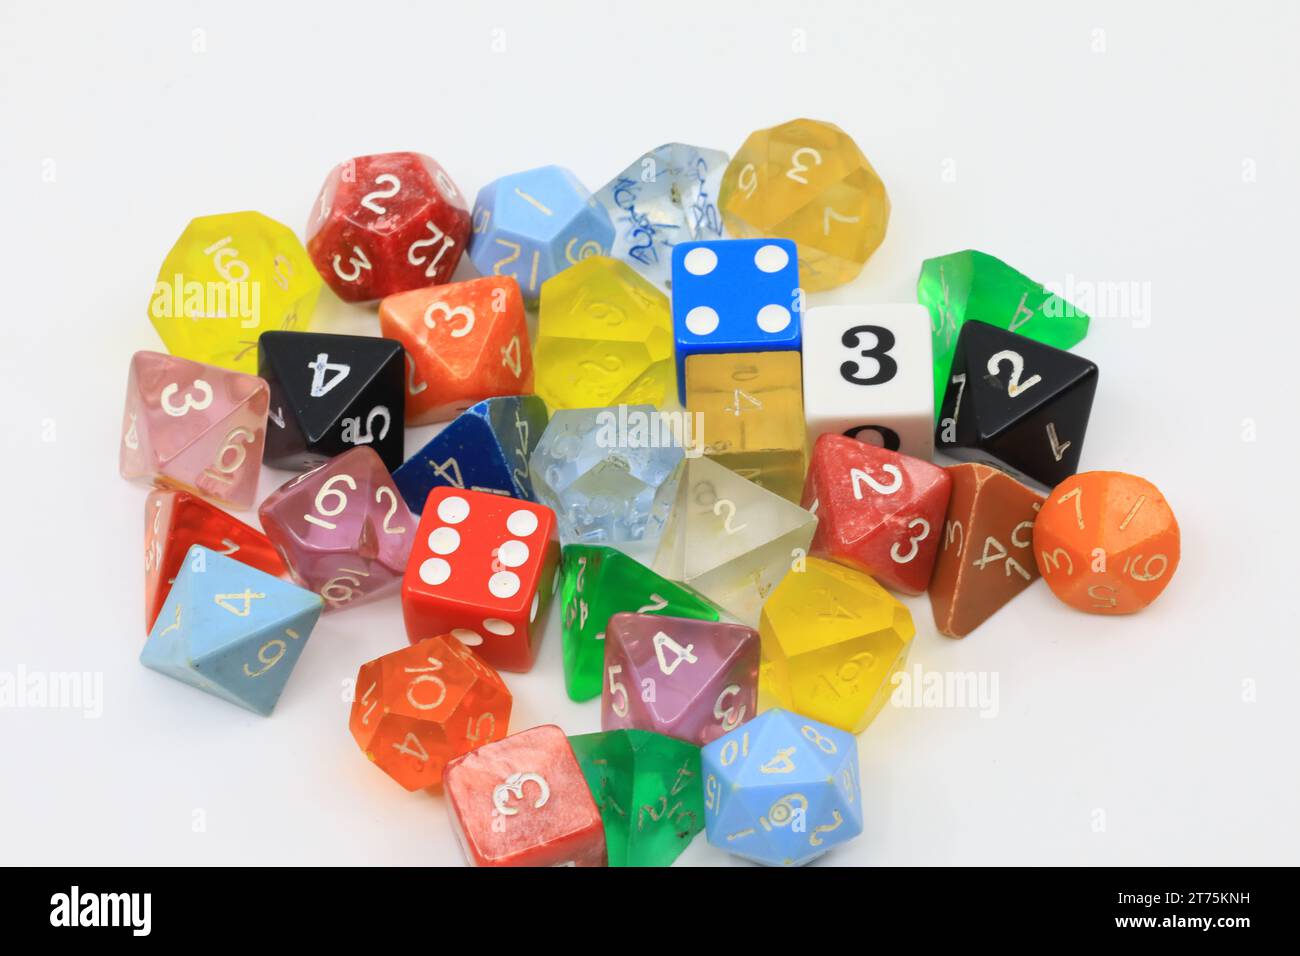 Dice for roll playing game Stock Photo